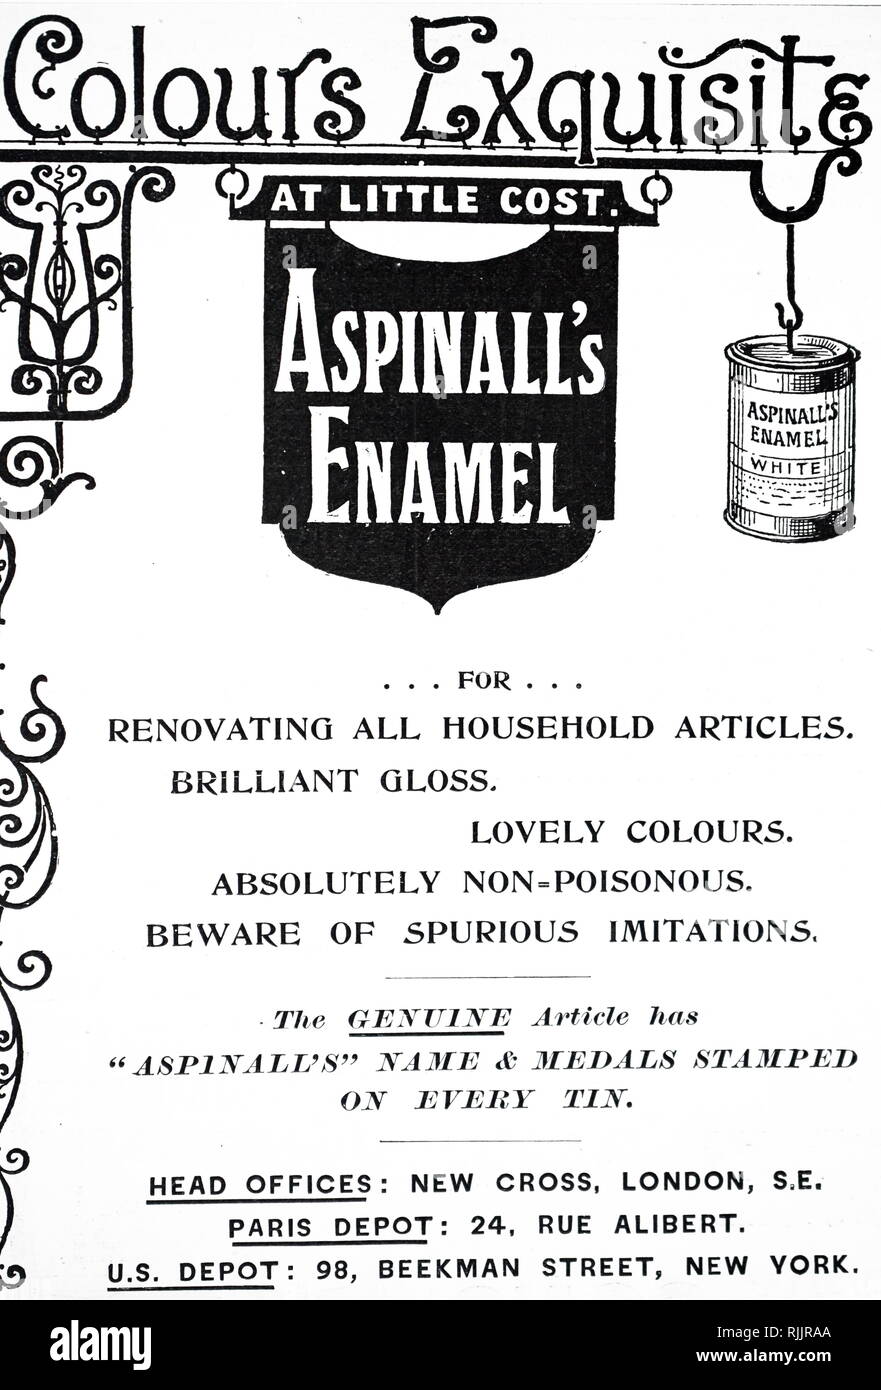 An advertisement for Aspinall's Enamel. Dated 20th century Stock Photo